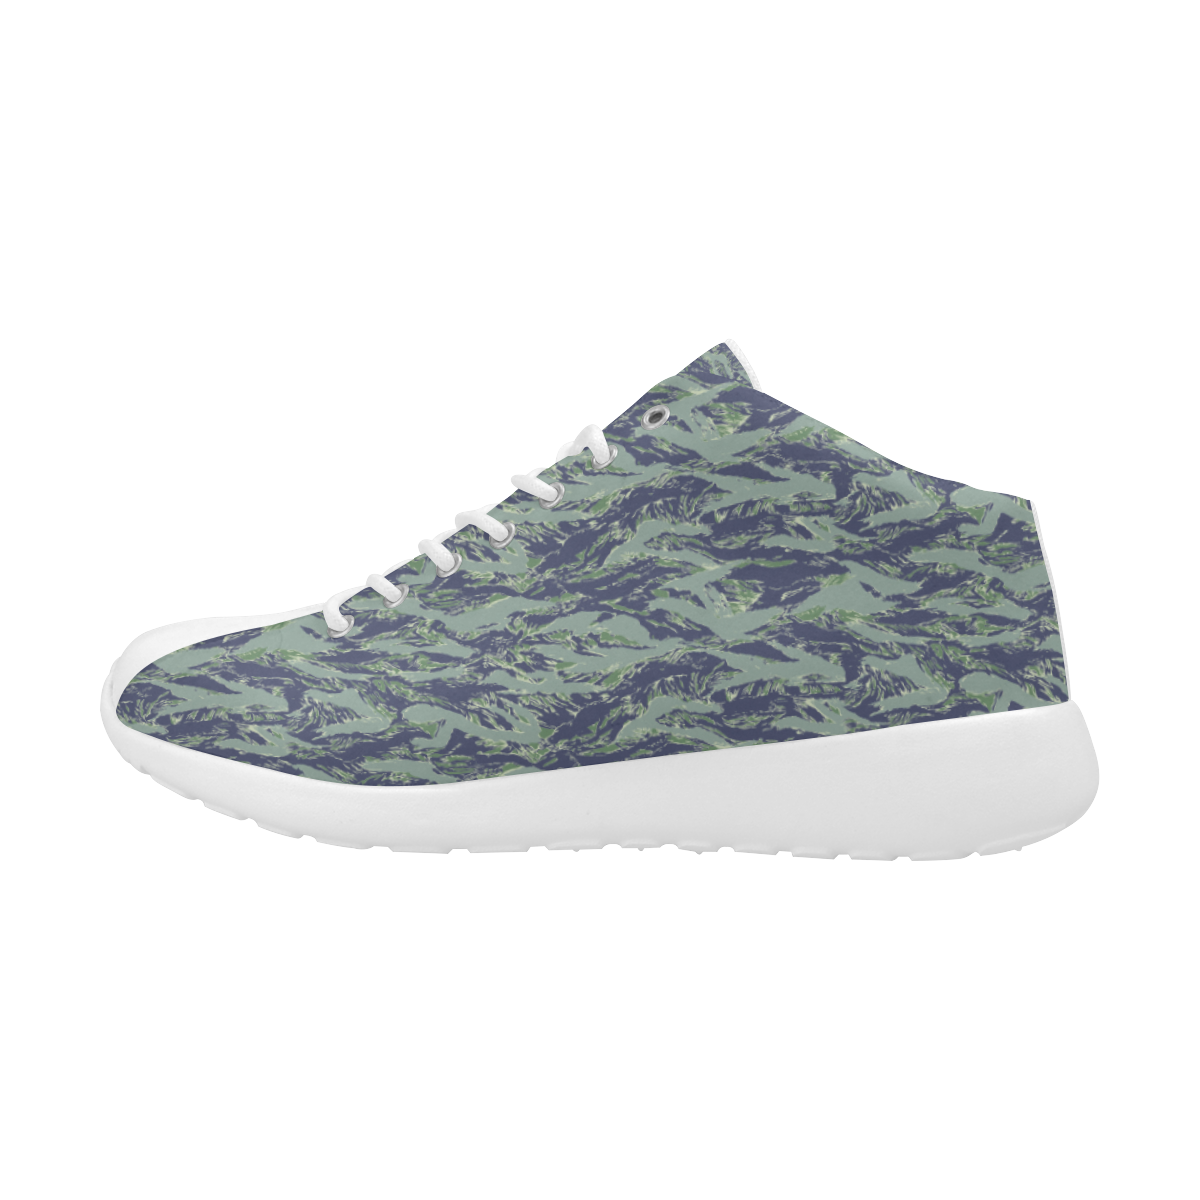 Jungle Tiger Stripe Green Camouflage Women's Basketball Training Shoes (Model 47502)